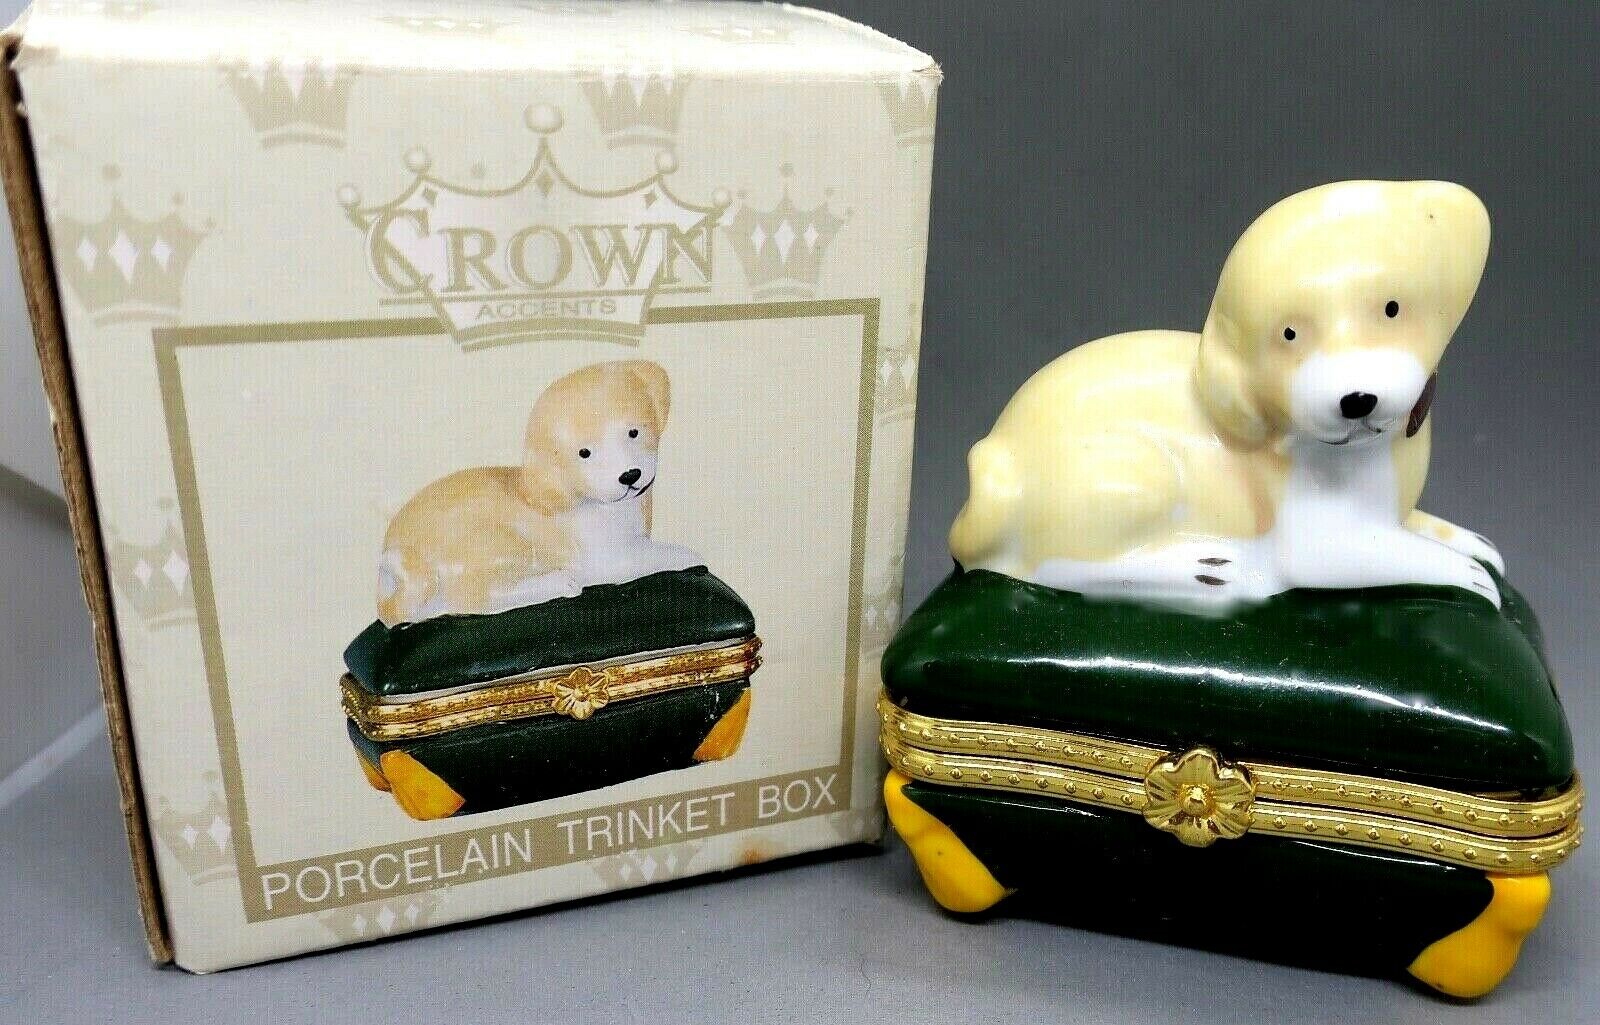 Beige & White Porcelain Dog On Green Pillow Trinket Box By Crown Accents In Box